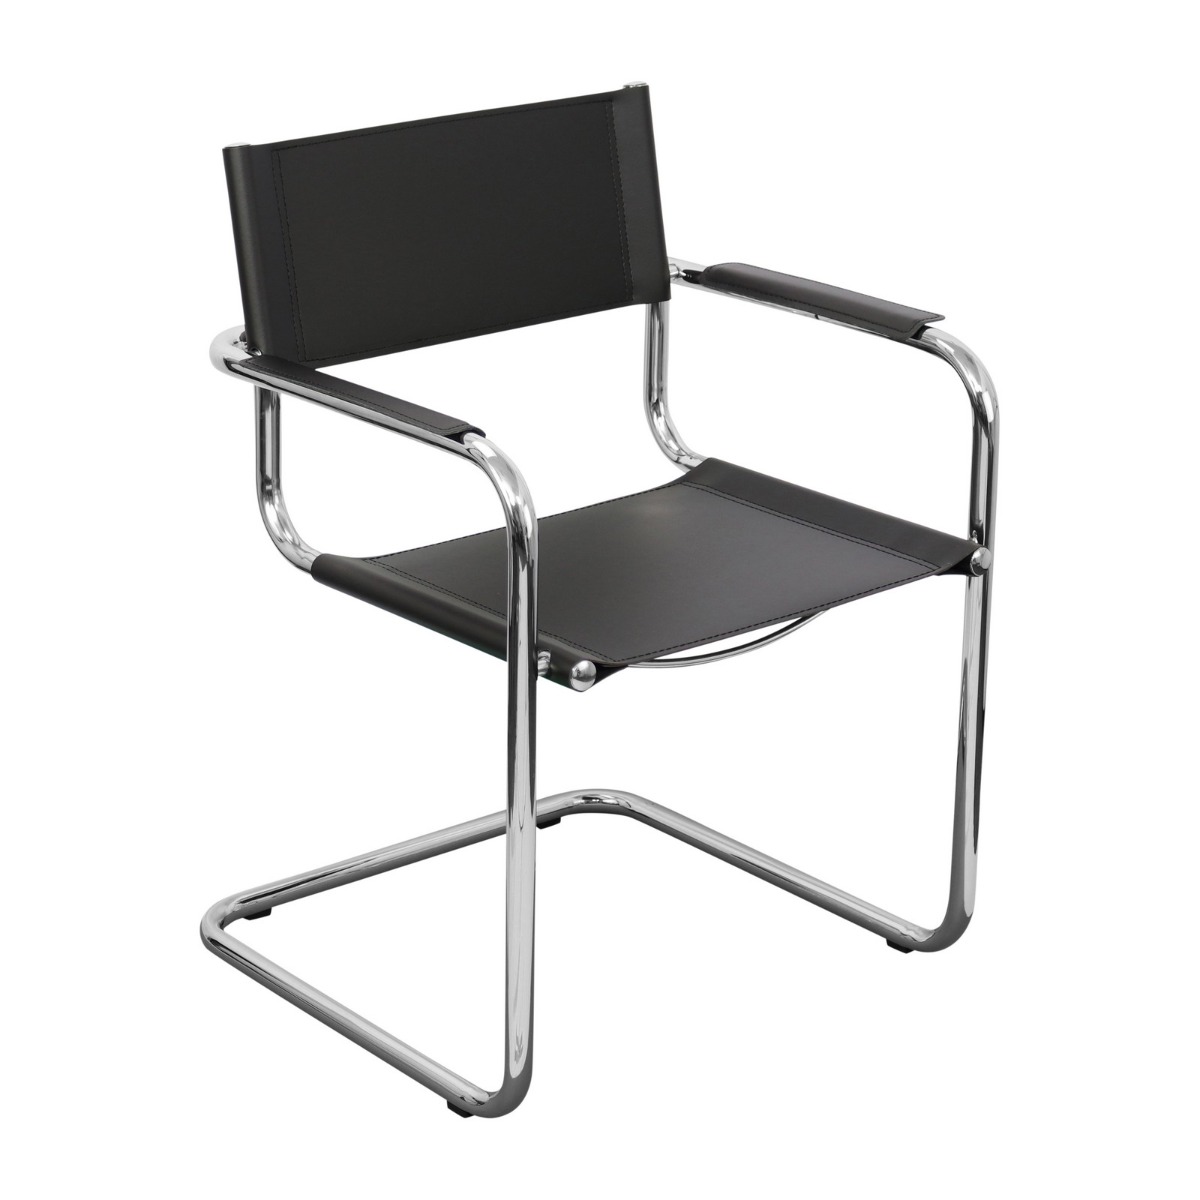 Breuer Chair Company Mart Stam Italia Cantilever Armchair Arm Chair in Chrome and Black Faux Leather